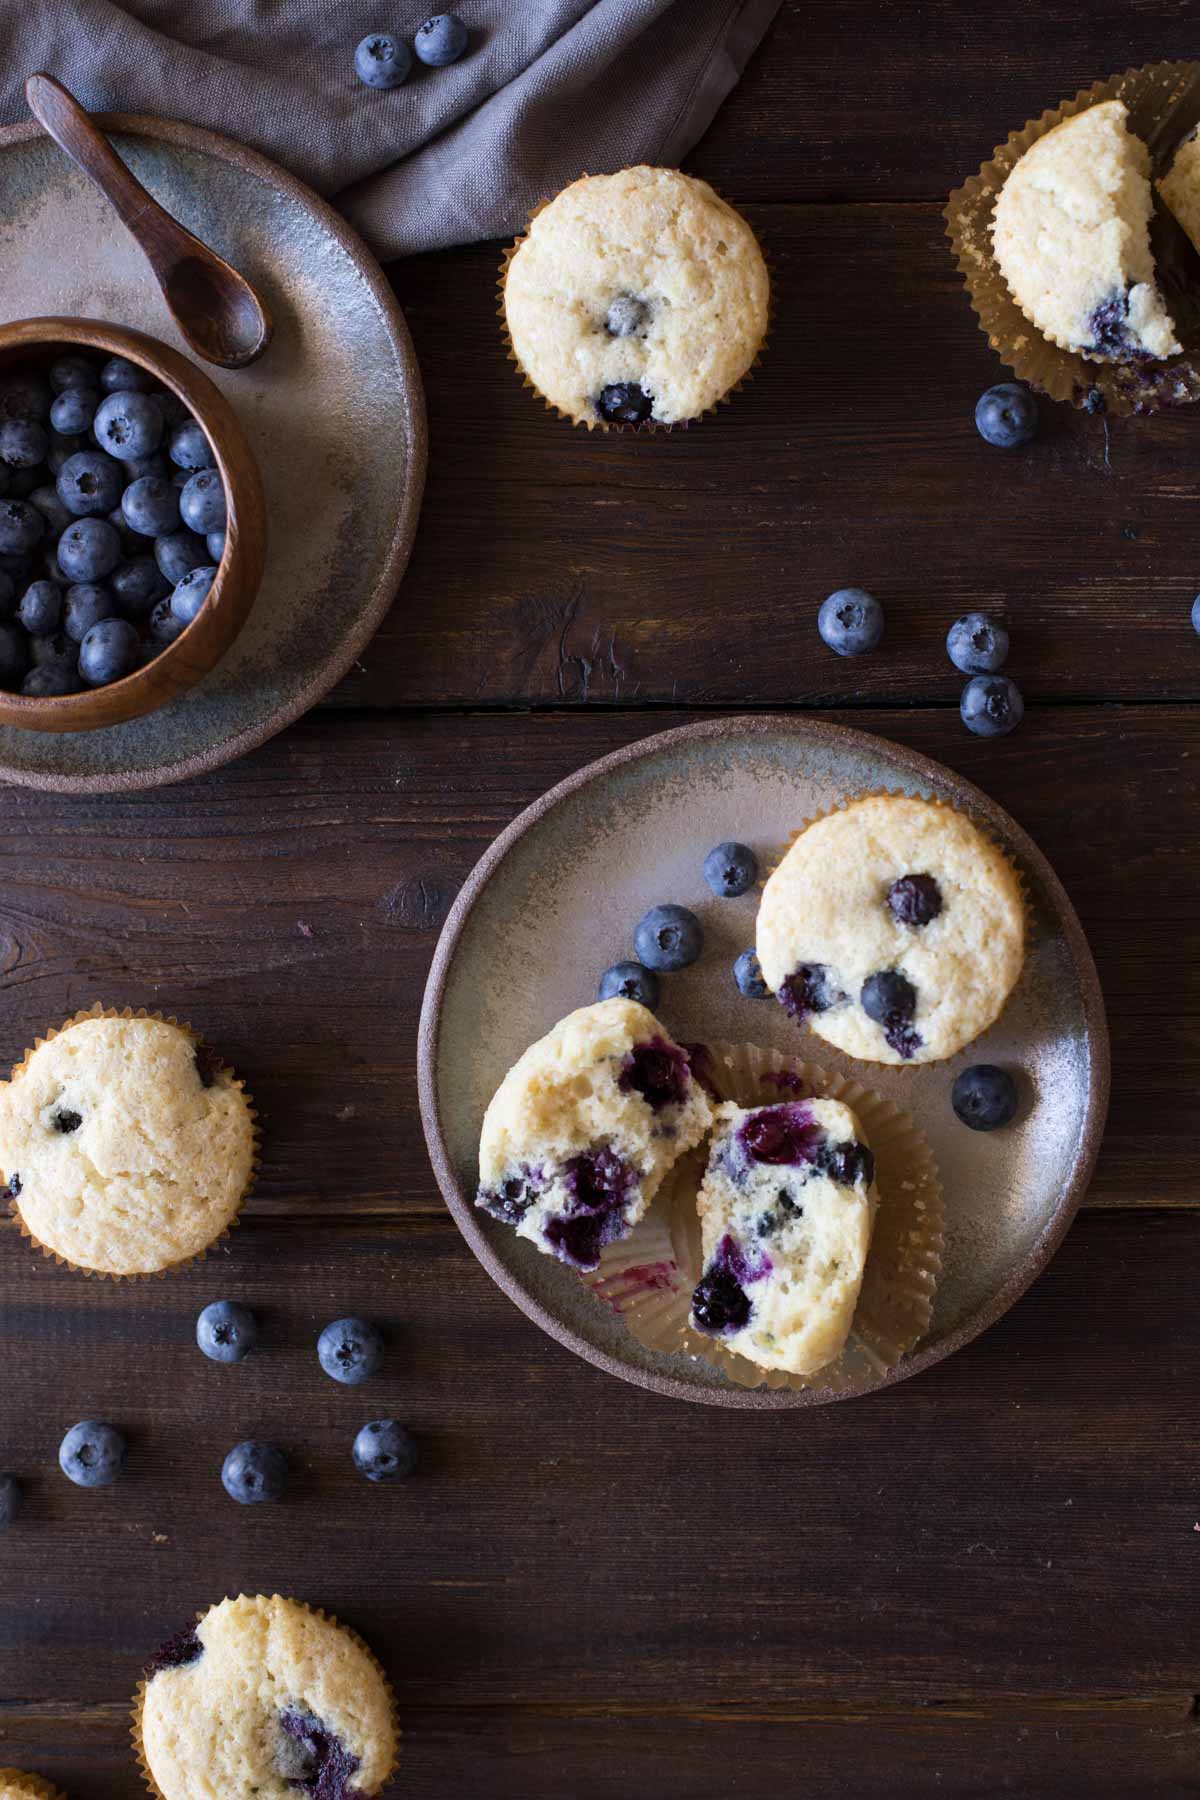 A Vanilla Blueberry Buttermilk Muffin split in half, sitting on a plate with a whole muffin and some blueberries, with more muffins and blueberries near the plate, and a wood bowl of blueberries sitting on another plate. 